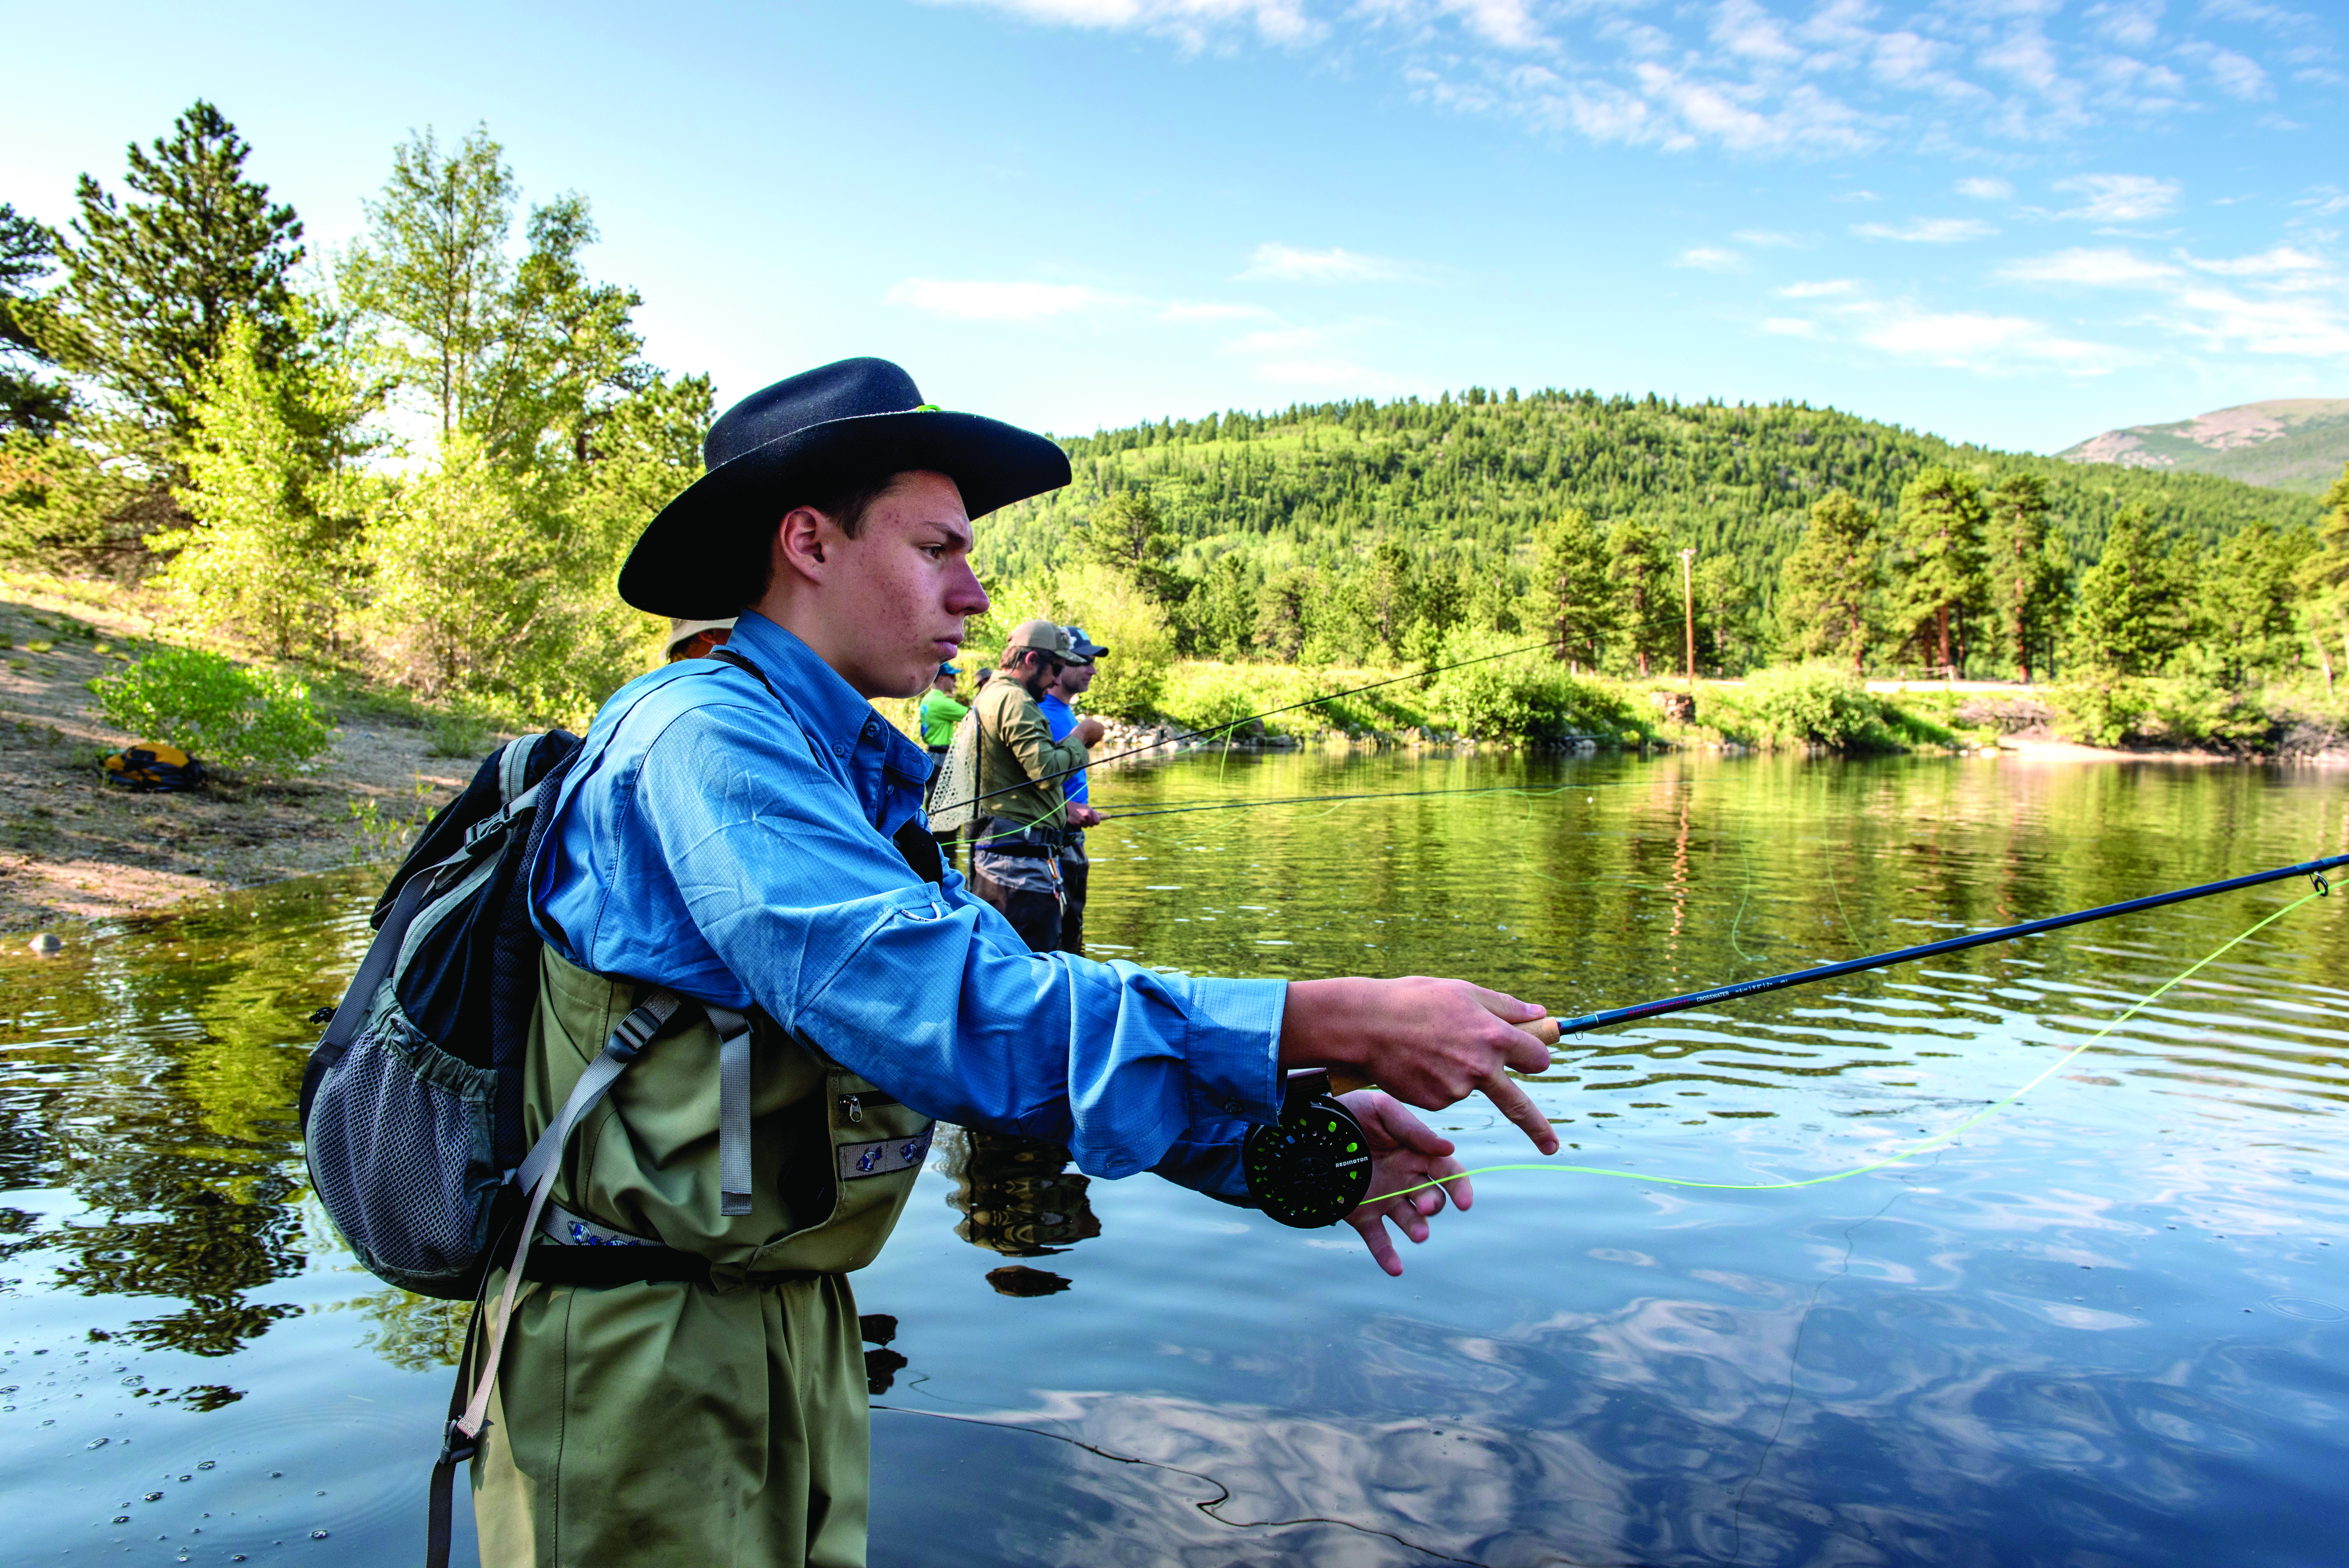 Scouts learn and practice fly fishing skills in Rocky Mountain National Park, Colorado